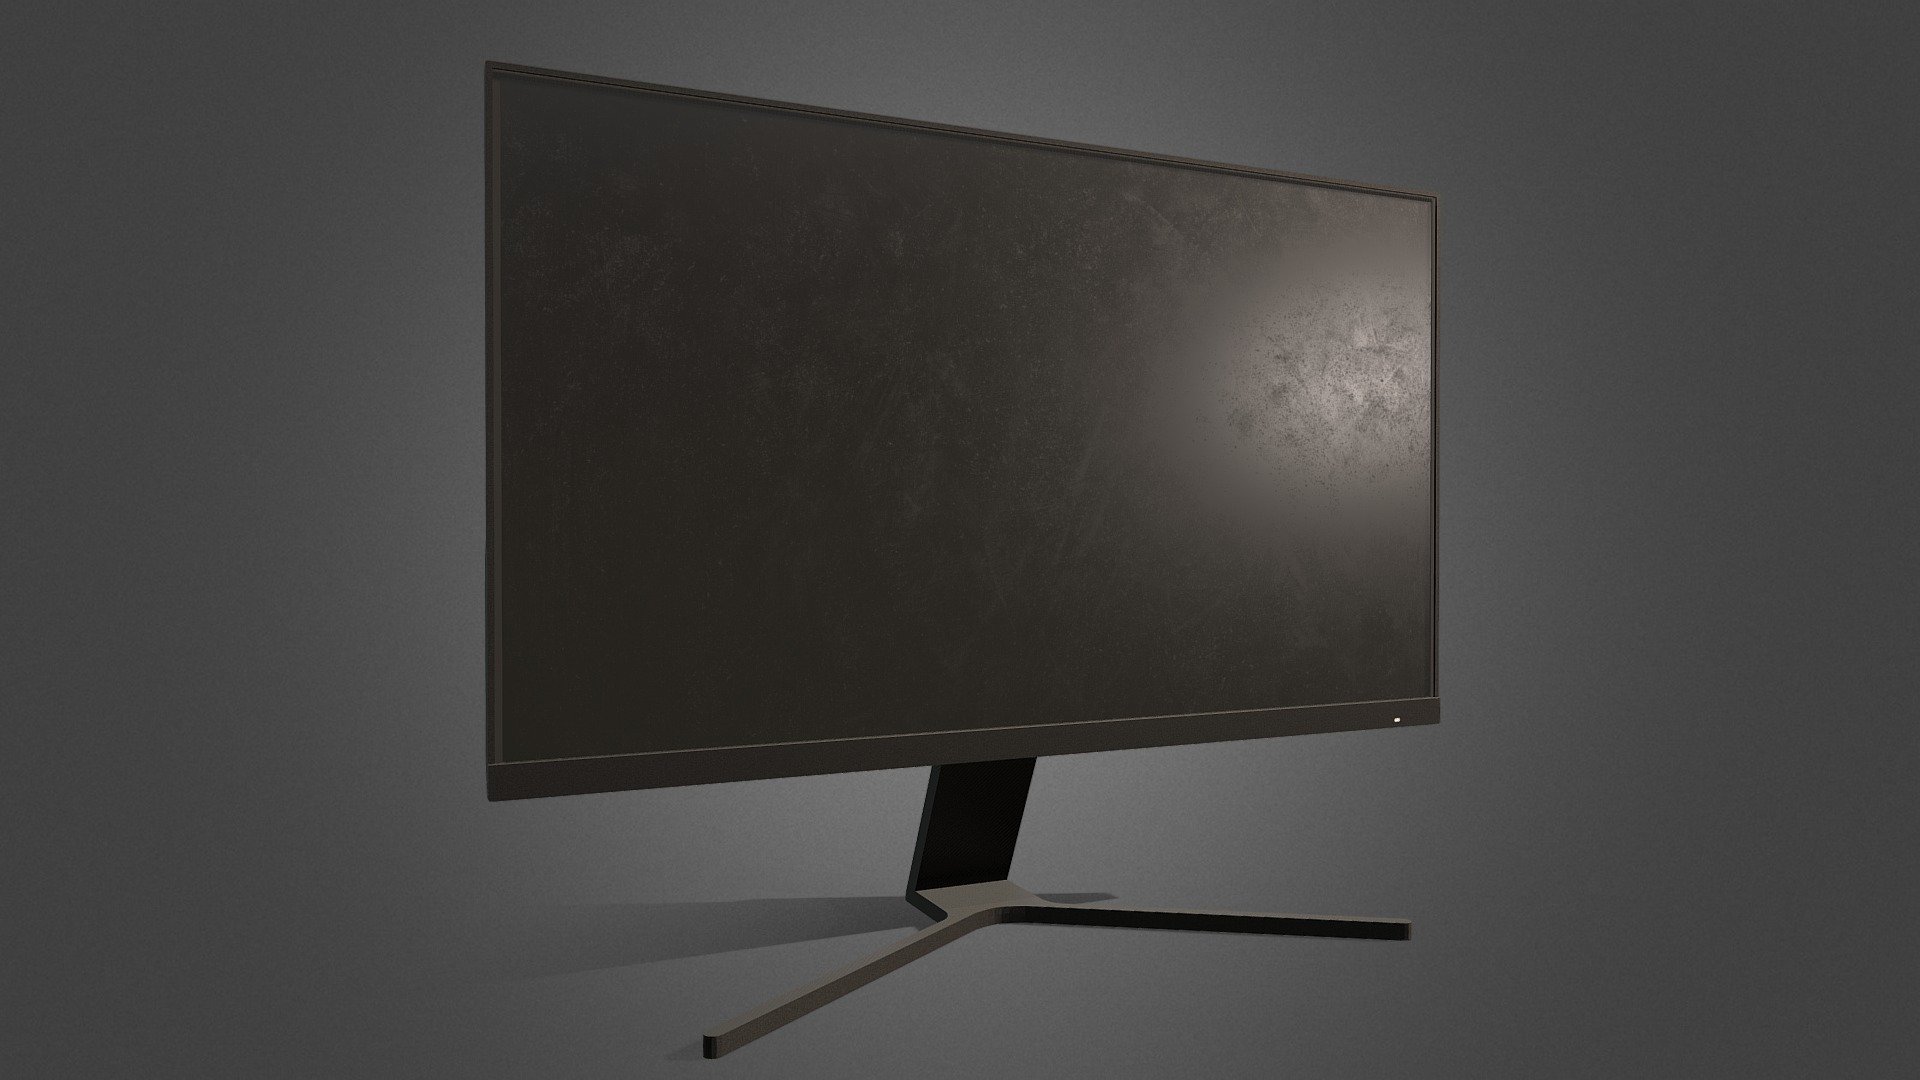 FBX, OBJ, BLEND, TEXTURES
A 27-inch monitor meticulously modeled in Blender, accurately representing real-life dimensions 3d model